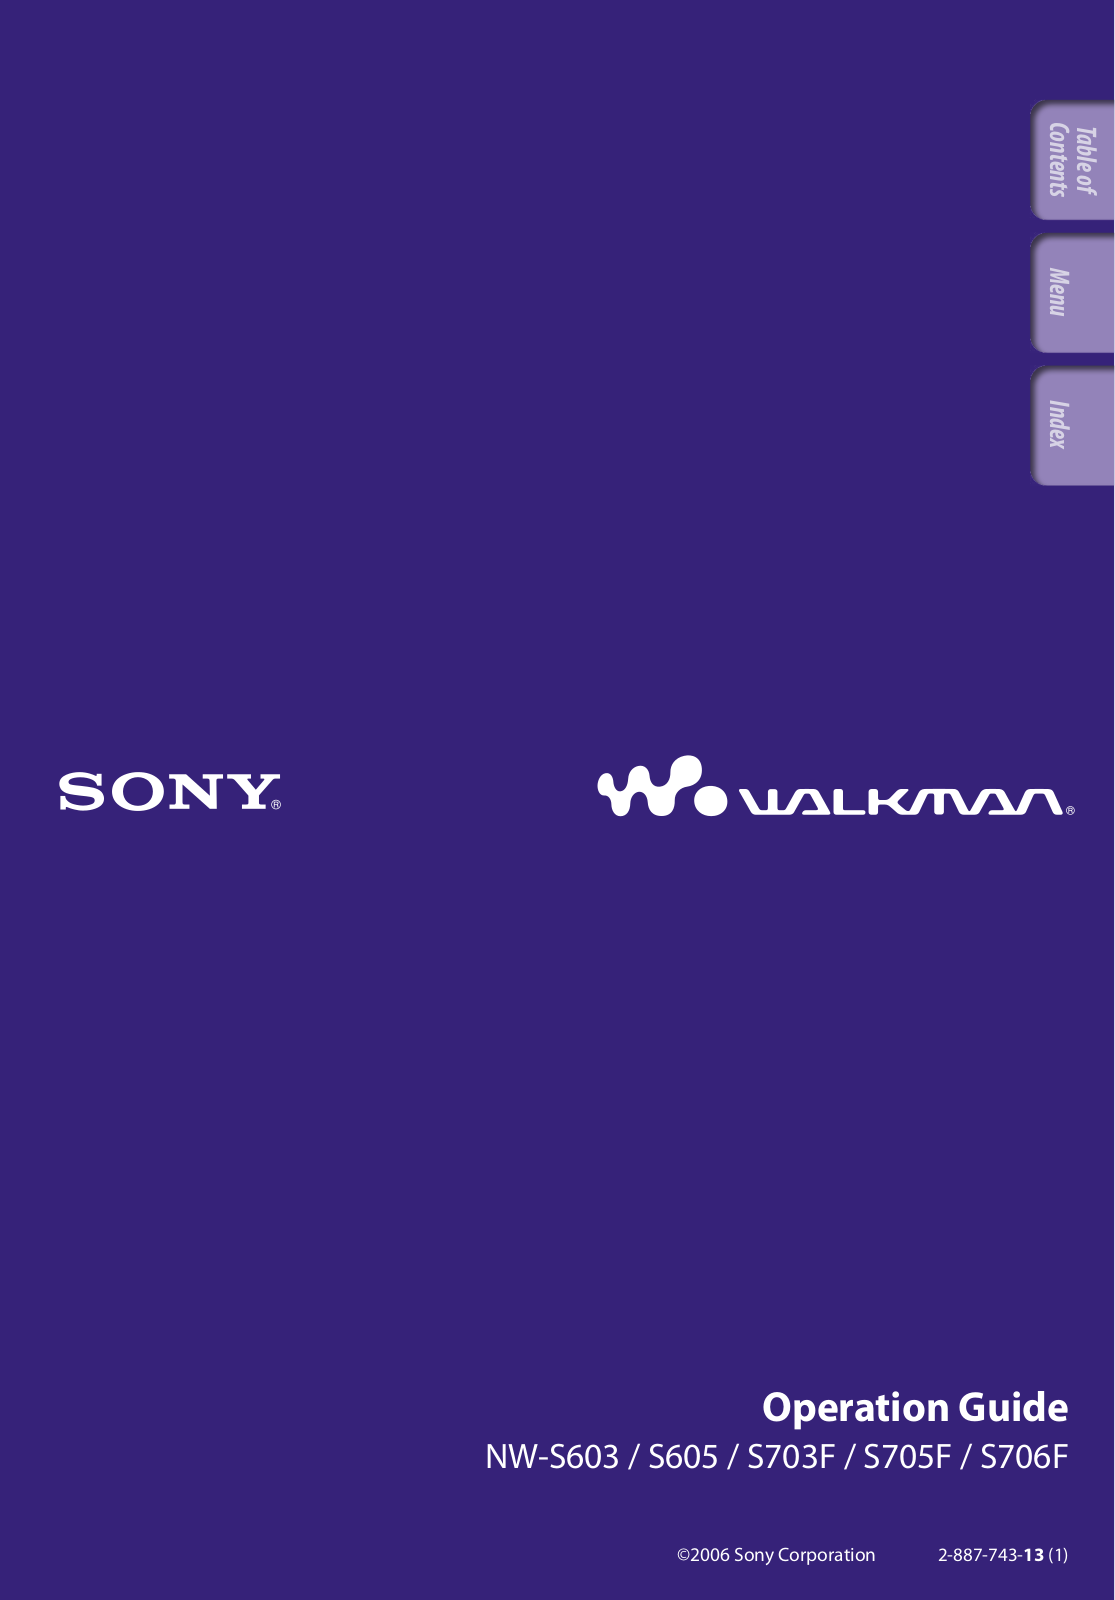 Sony NW-S706F, NW-S705F User Manual